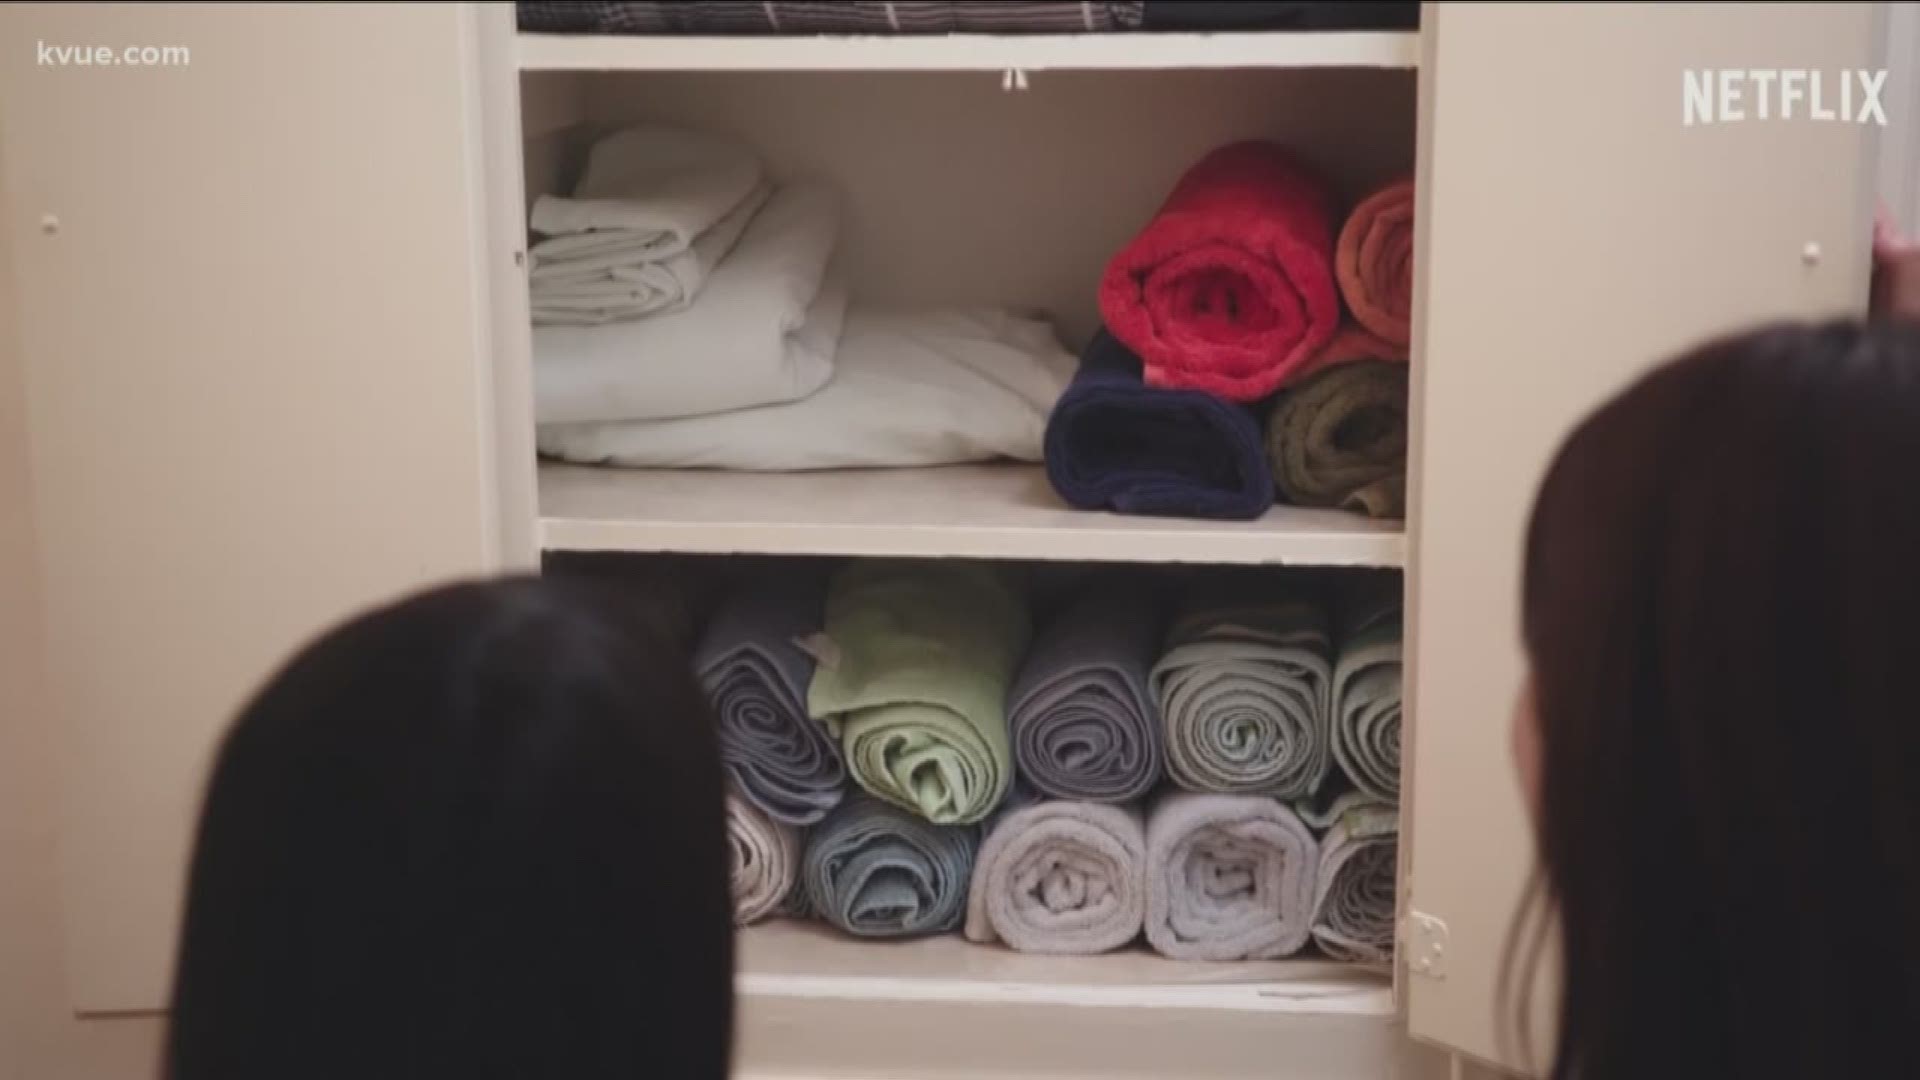 A new show on Netflix has viewers looking to de-clutter in the new year. KVUE decided to test out the KonMari method.